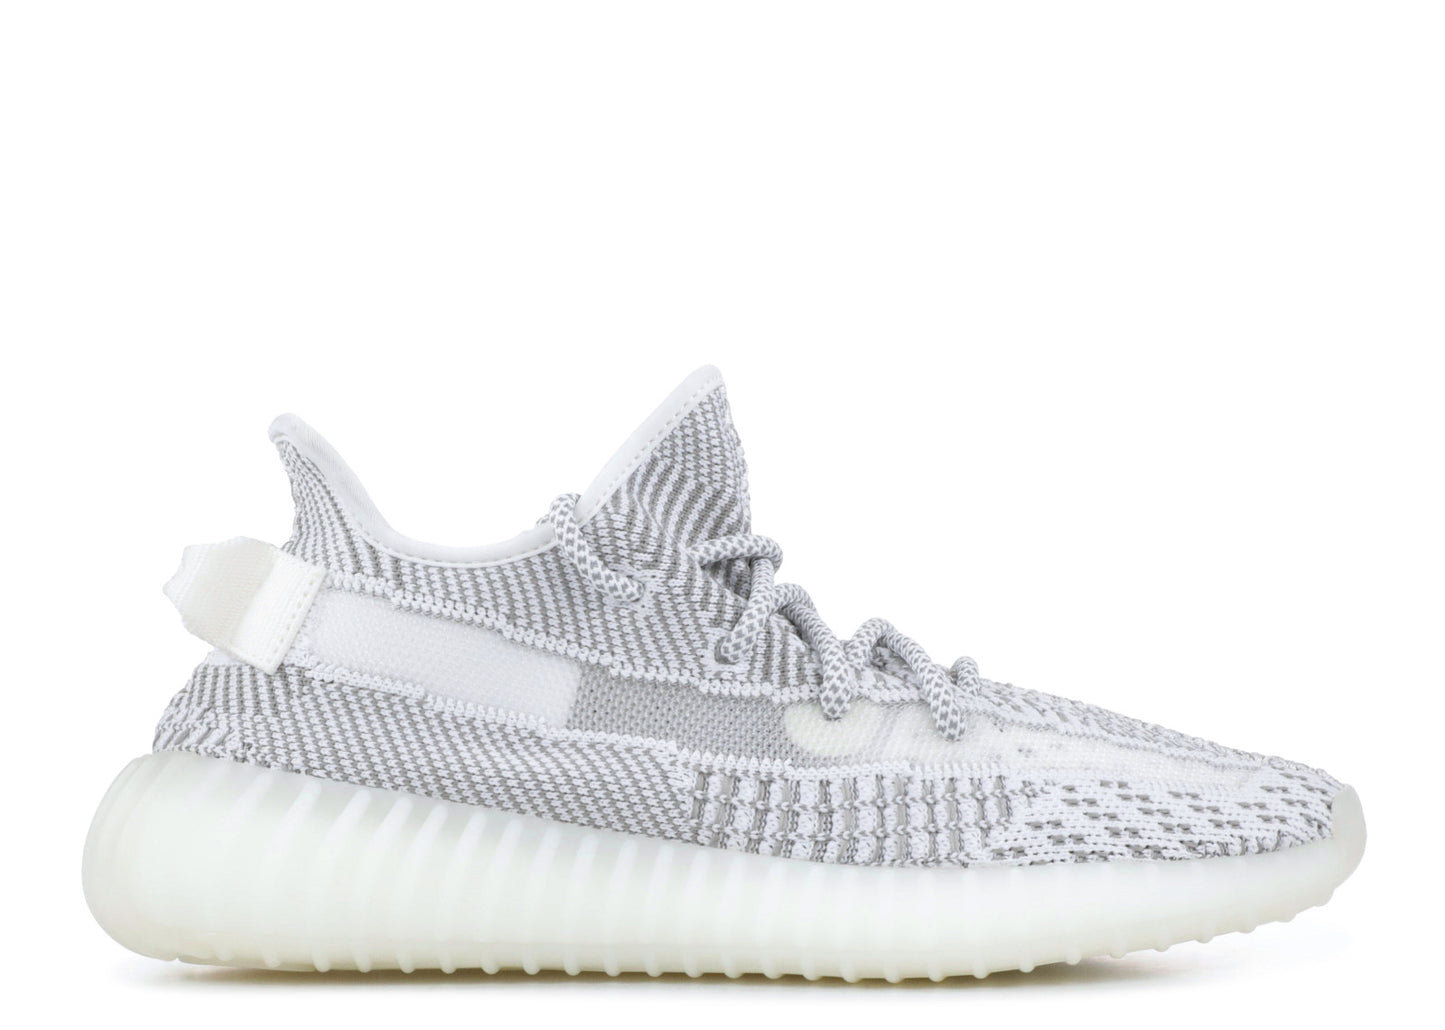 Adidas Yeezy Boost 350 V2 "Static Non-Reflective"